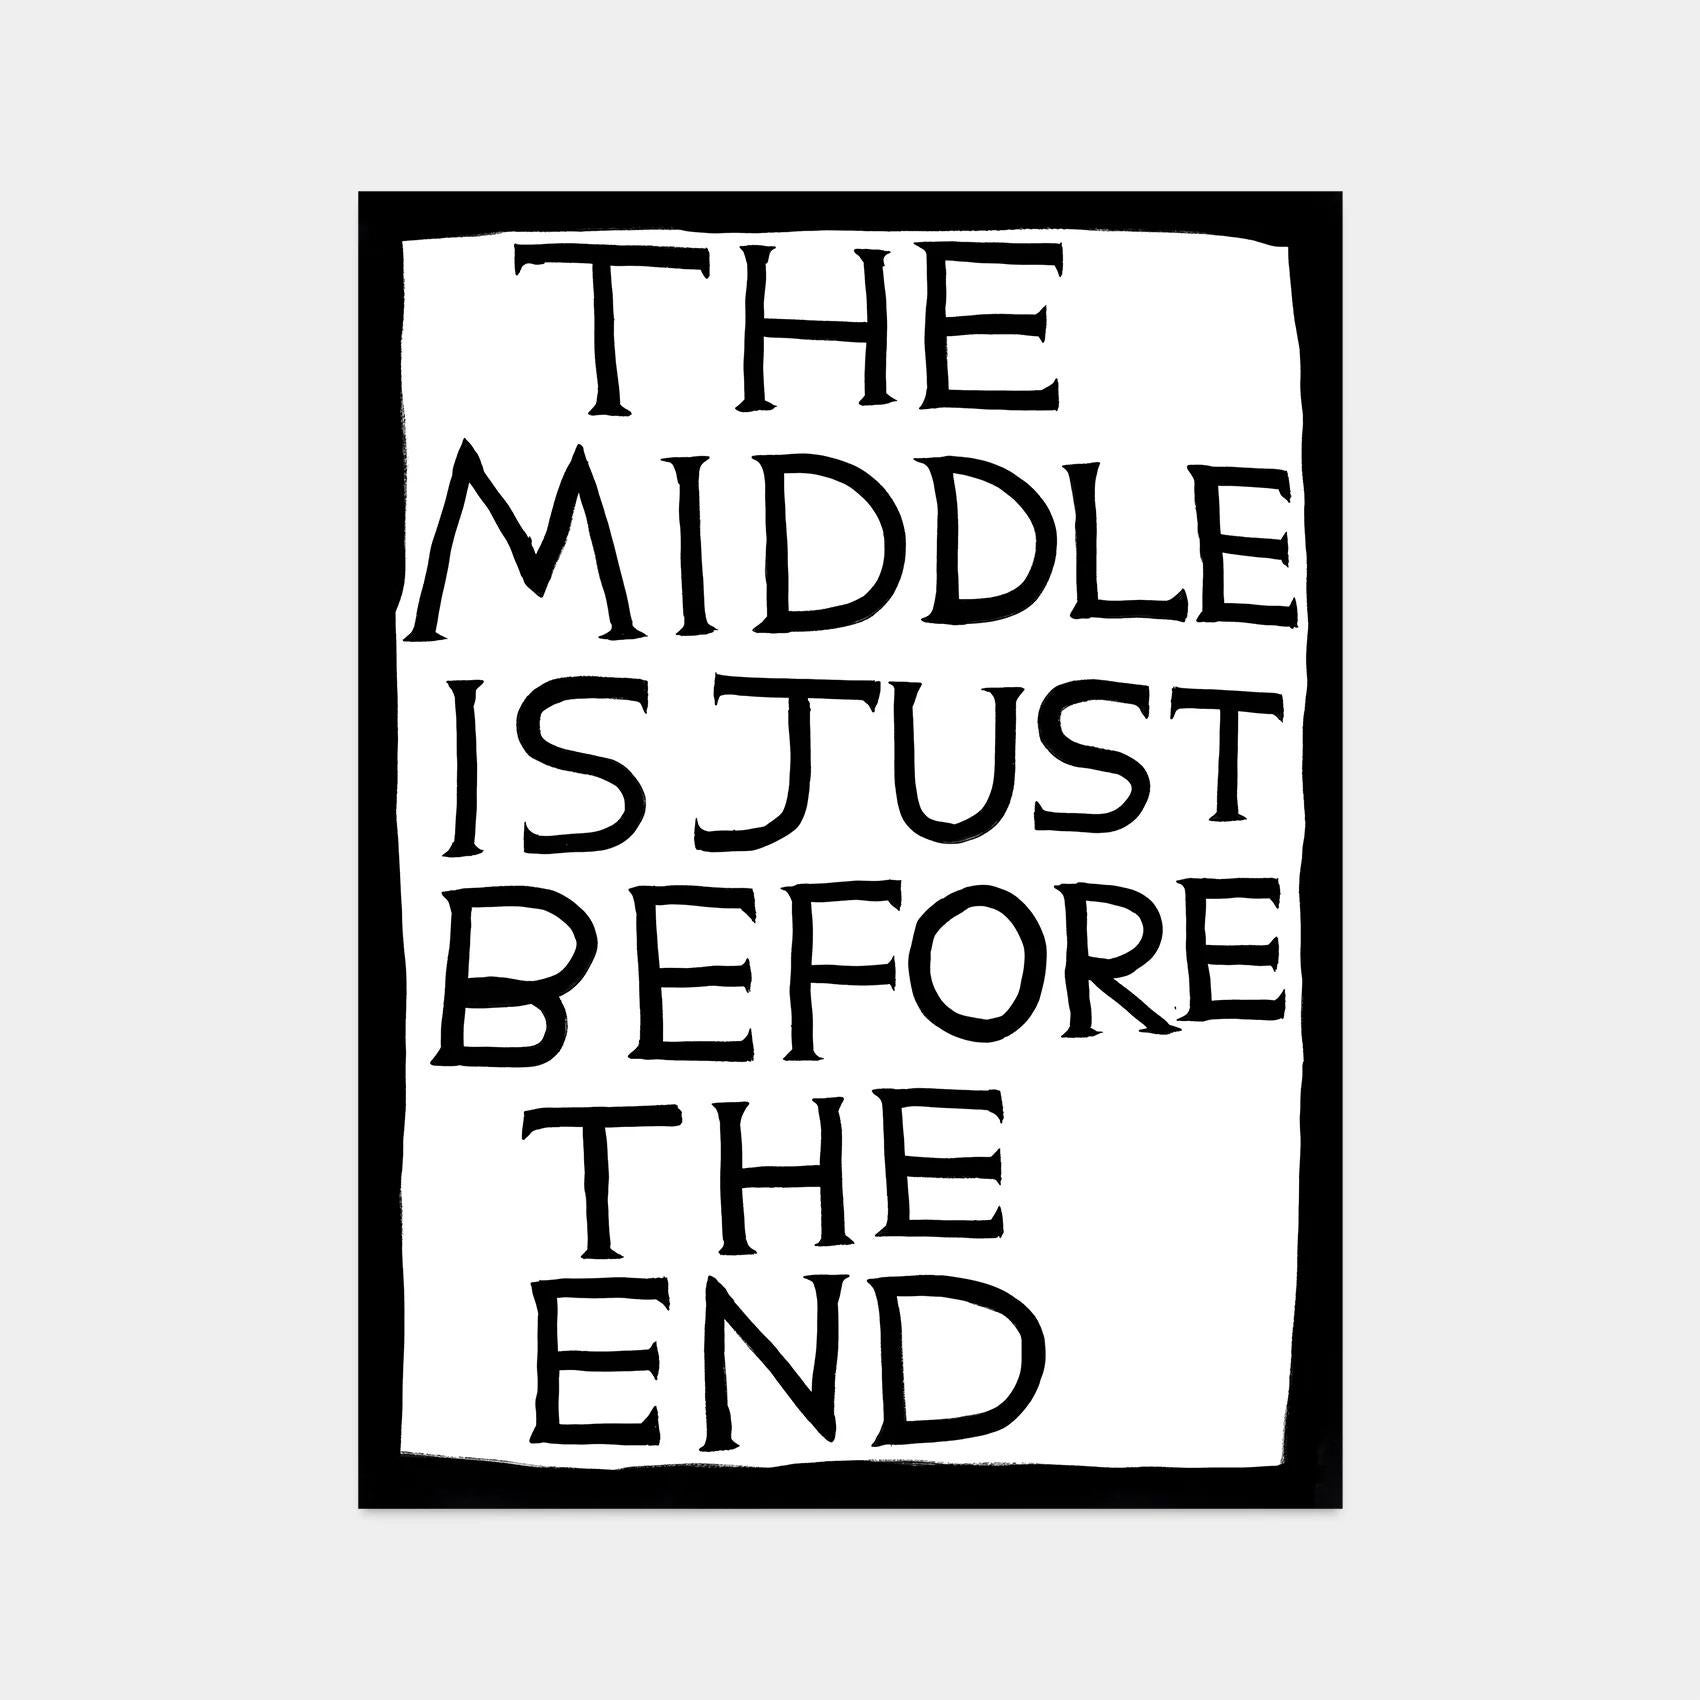 David Shrigley
Untitled (The Middle Is Just Before The End), 2022
Off-set lithography printed on 200g Munken Lynx paper
70 x 50 cm
